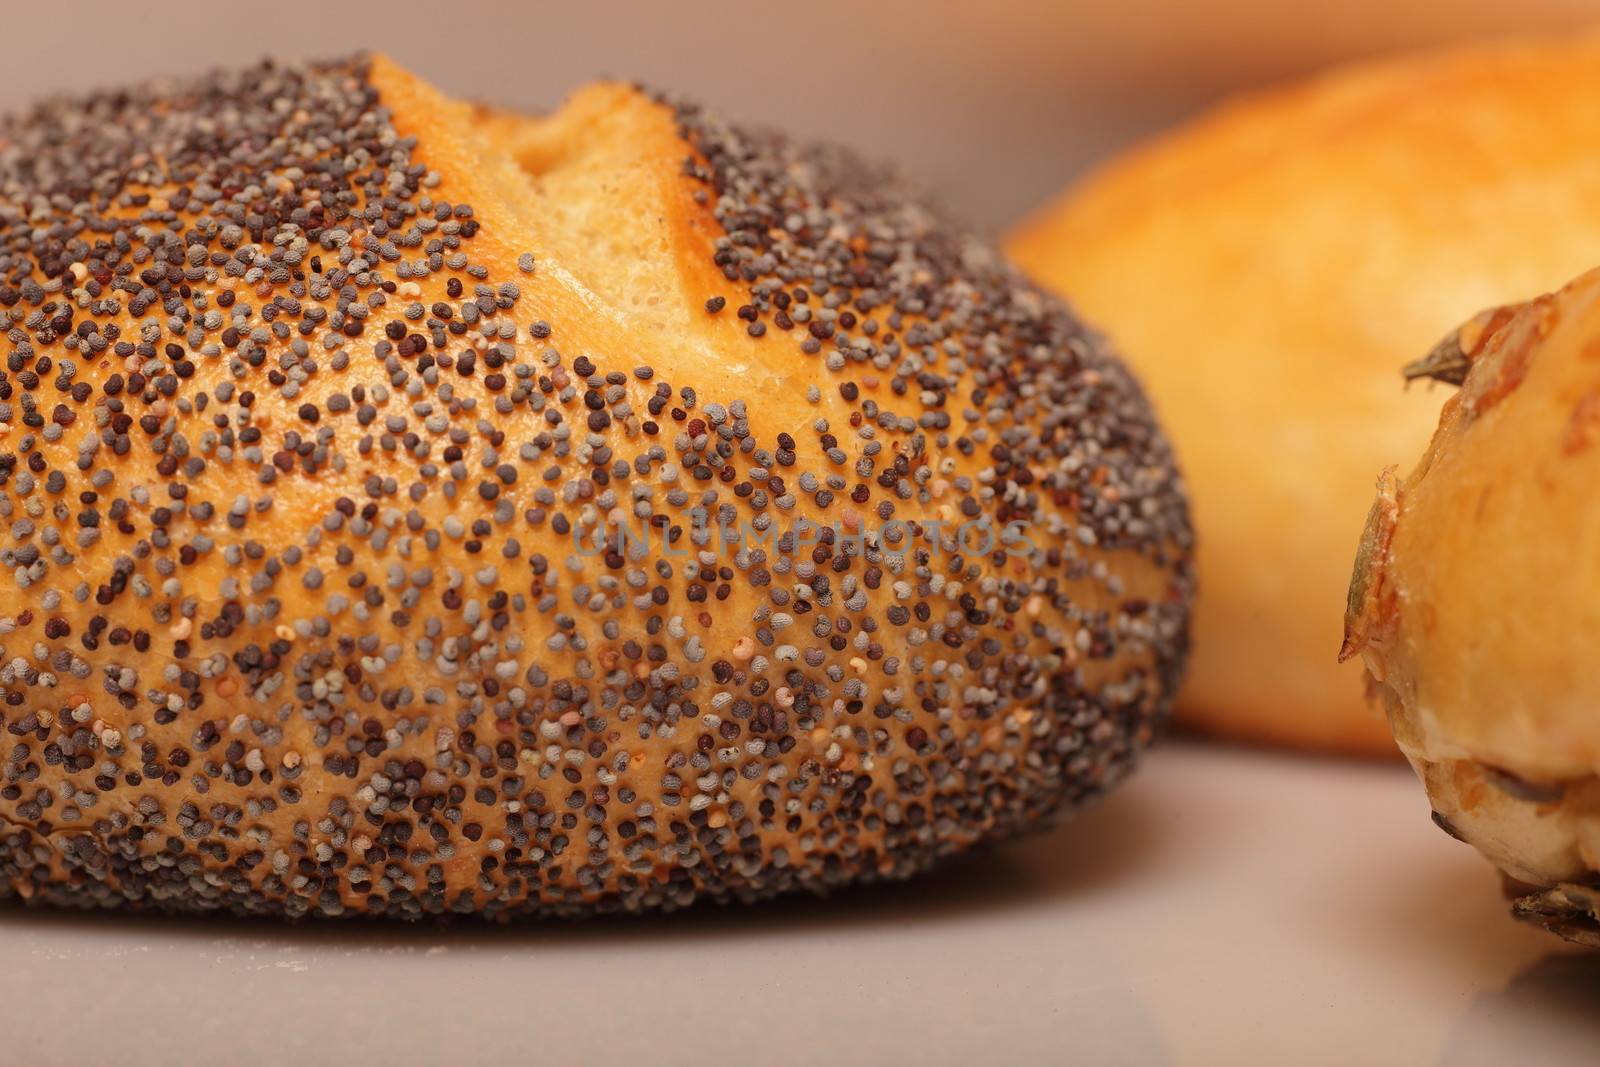 Close up side view of a freshly baked crusty golden poppy seed bread loaf or roll